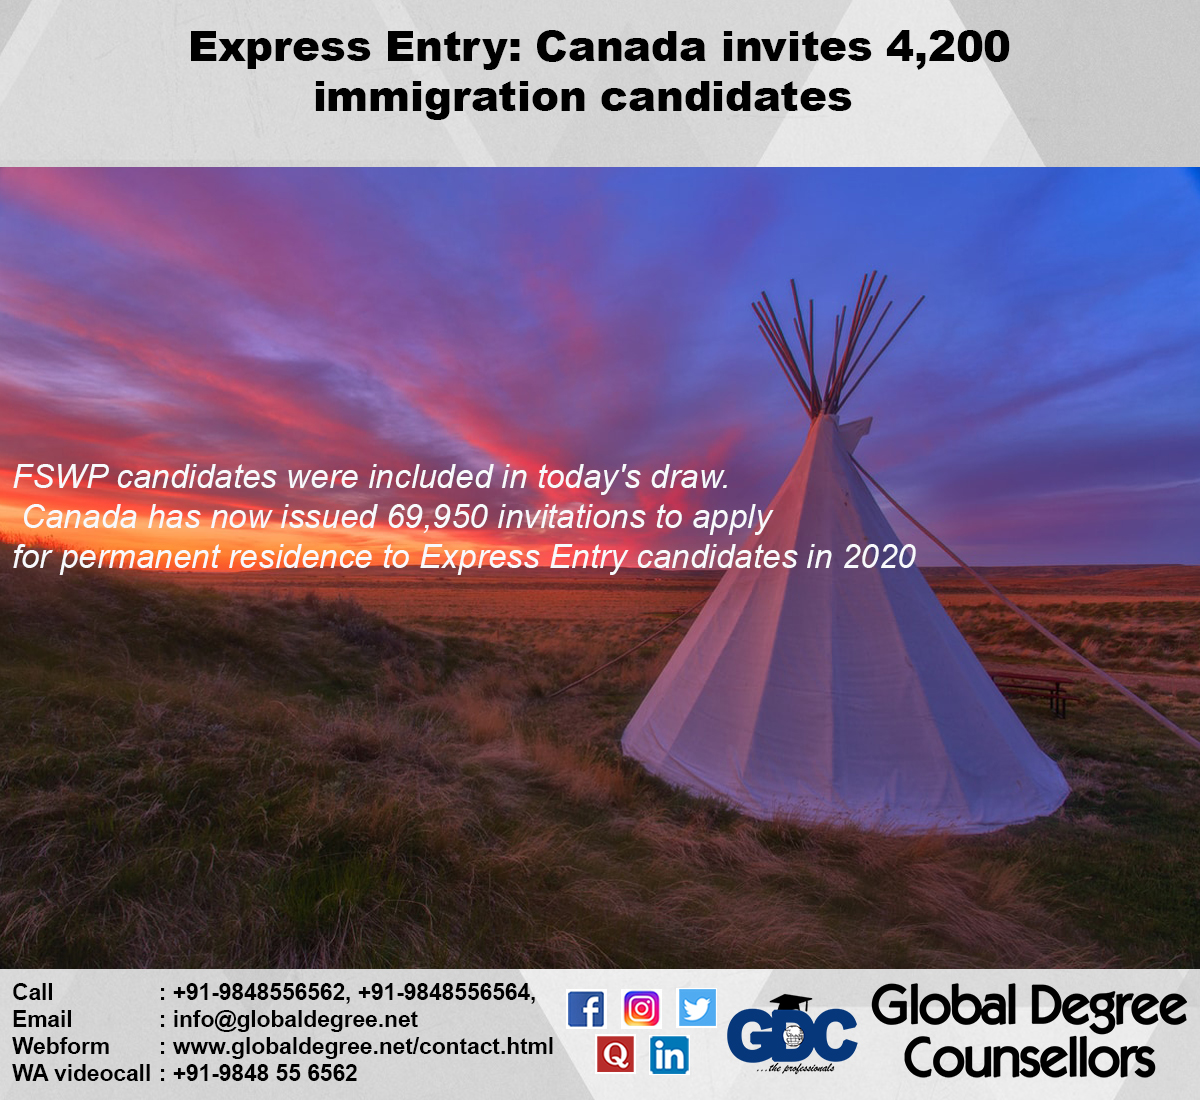 Express Entry: Canada Invites 4,200 Immigration Candidates